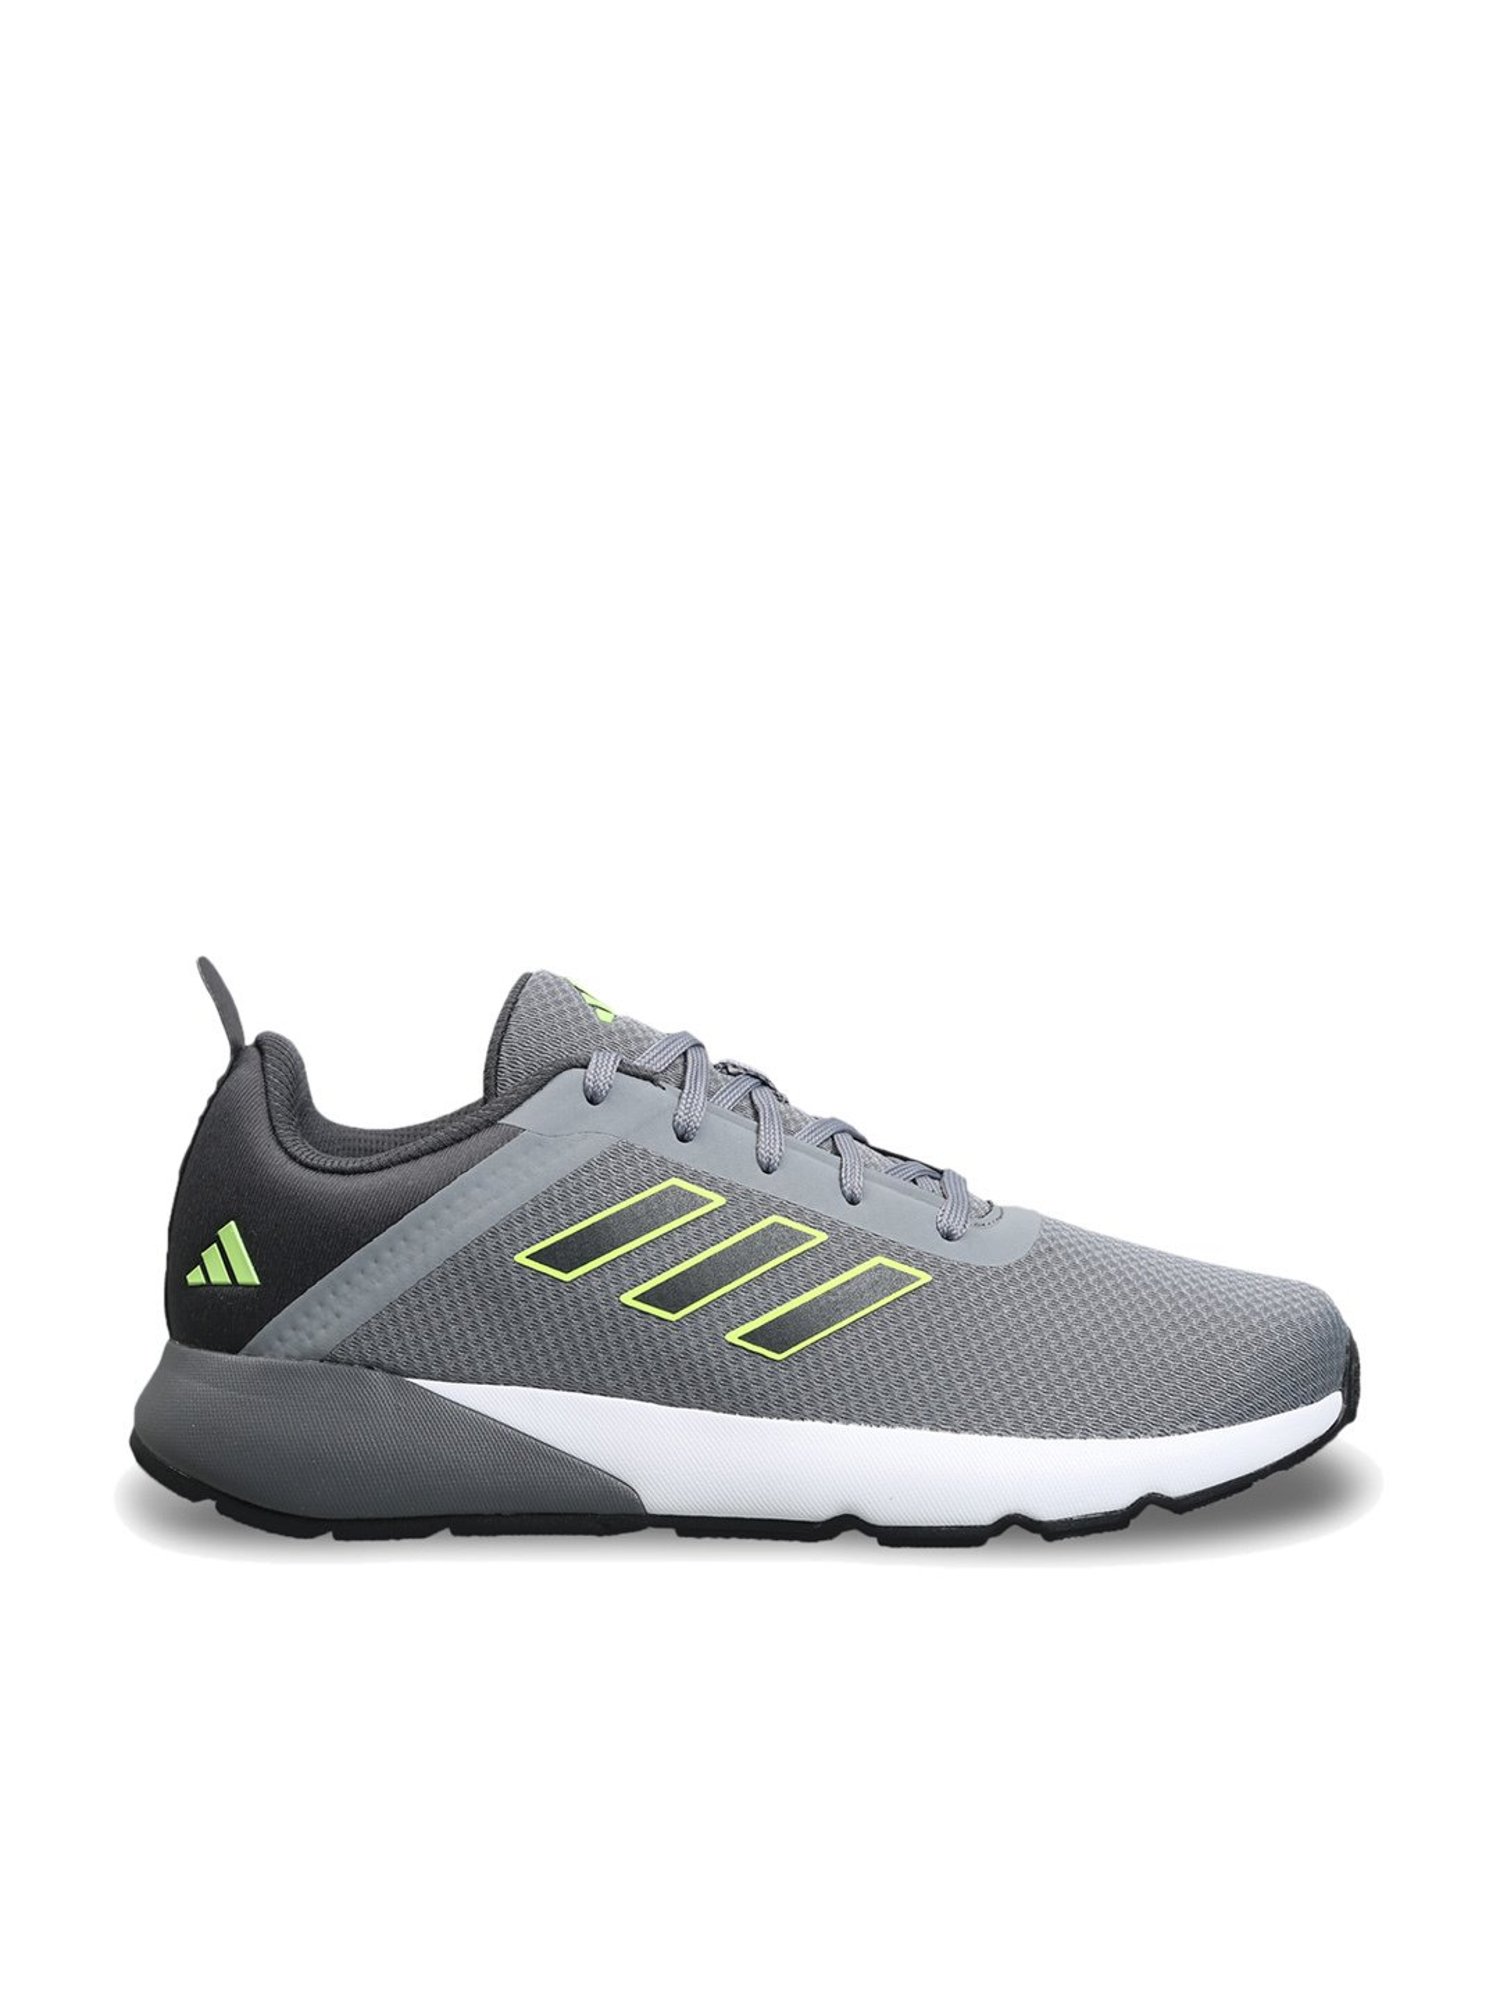 Buy ADIDAS Men Grey Running Shoes - Sports Shoes for Men 6841838 | Myntra